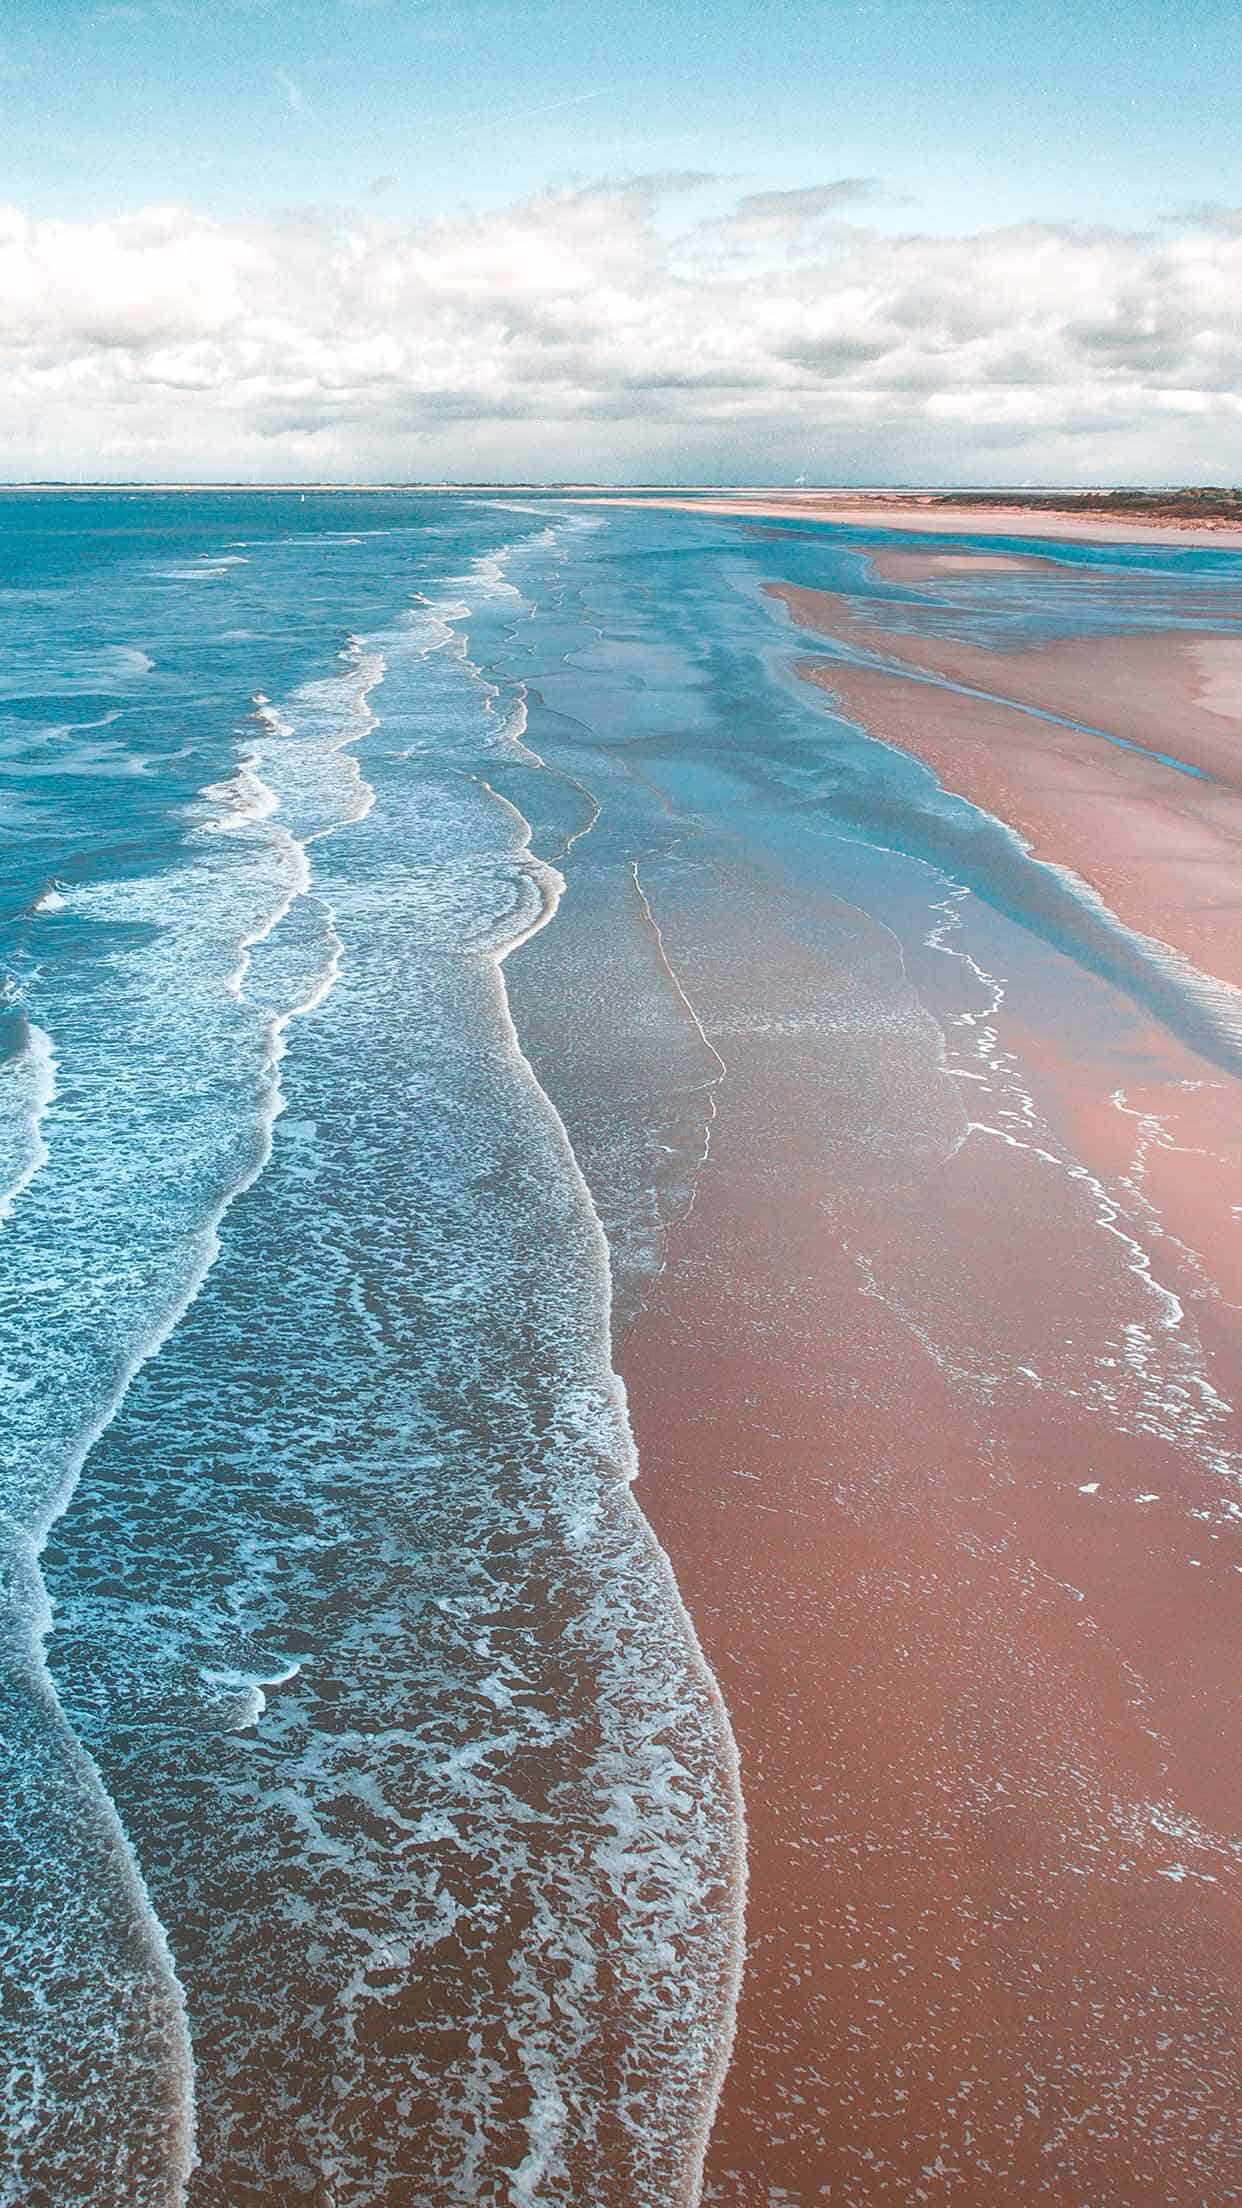 9 Best Ocean iPhone XS Wallpapers – Best Water Beach Sea Backgrounds. 9 Best Ocean iPhone XS Wallpapers - best blue sea water backgrounds for your inspiration - awesome nature, sun, the beach #iphone #wallpaper #background #sunset #beach #photography #nature #ocean #sea #samsung 